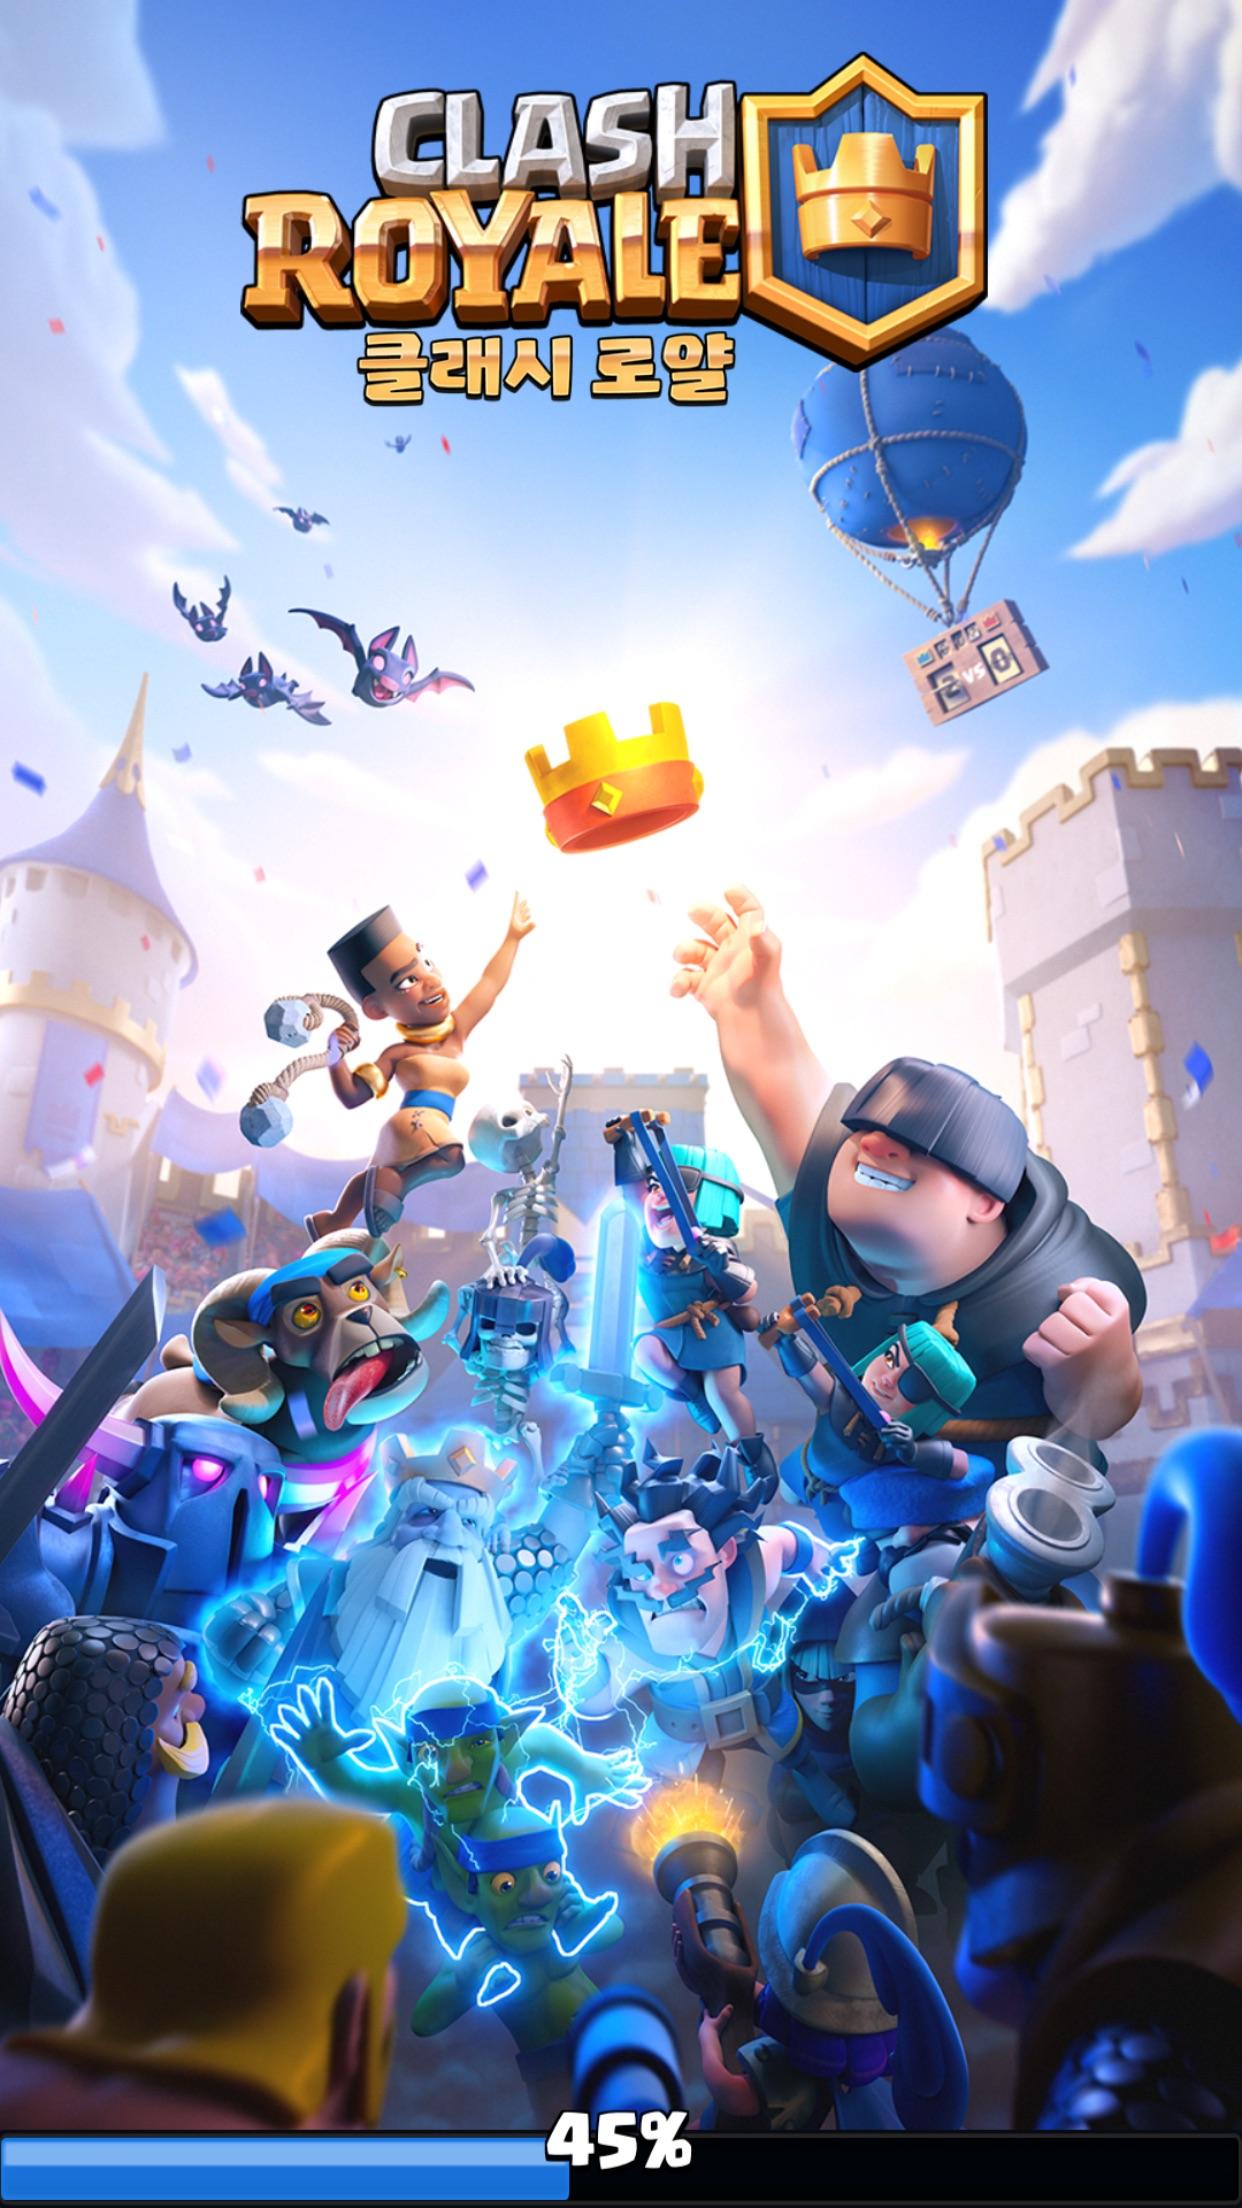 ClashRoyale I love the loading pic. Can I get this as a wallpaper